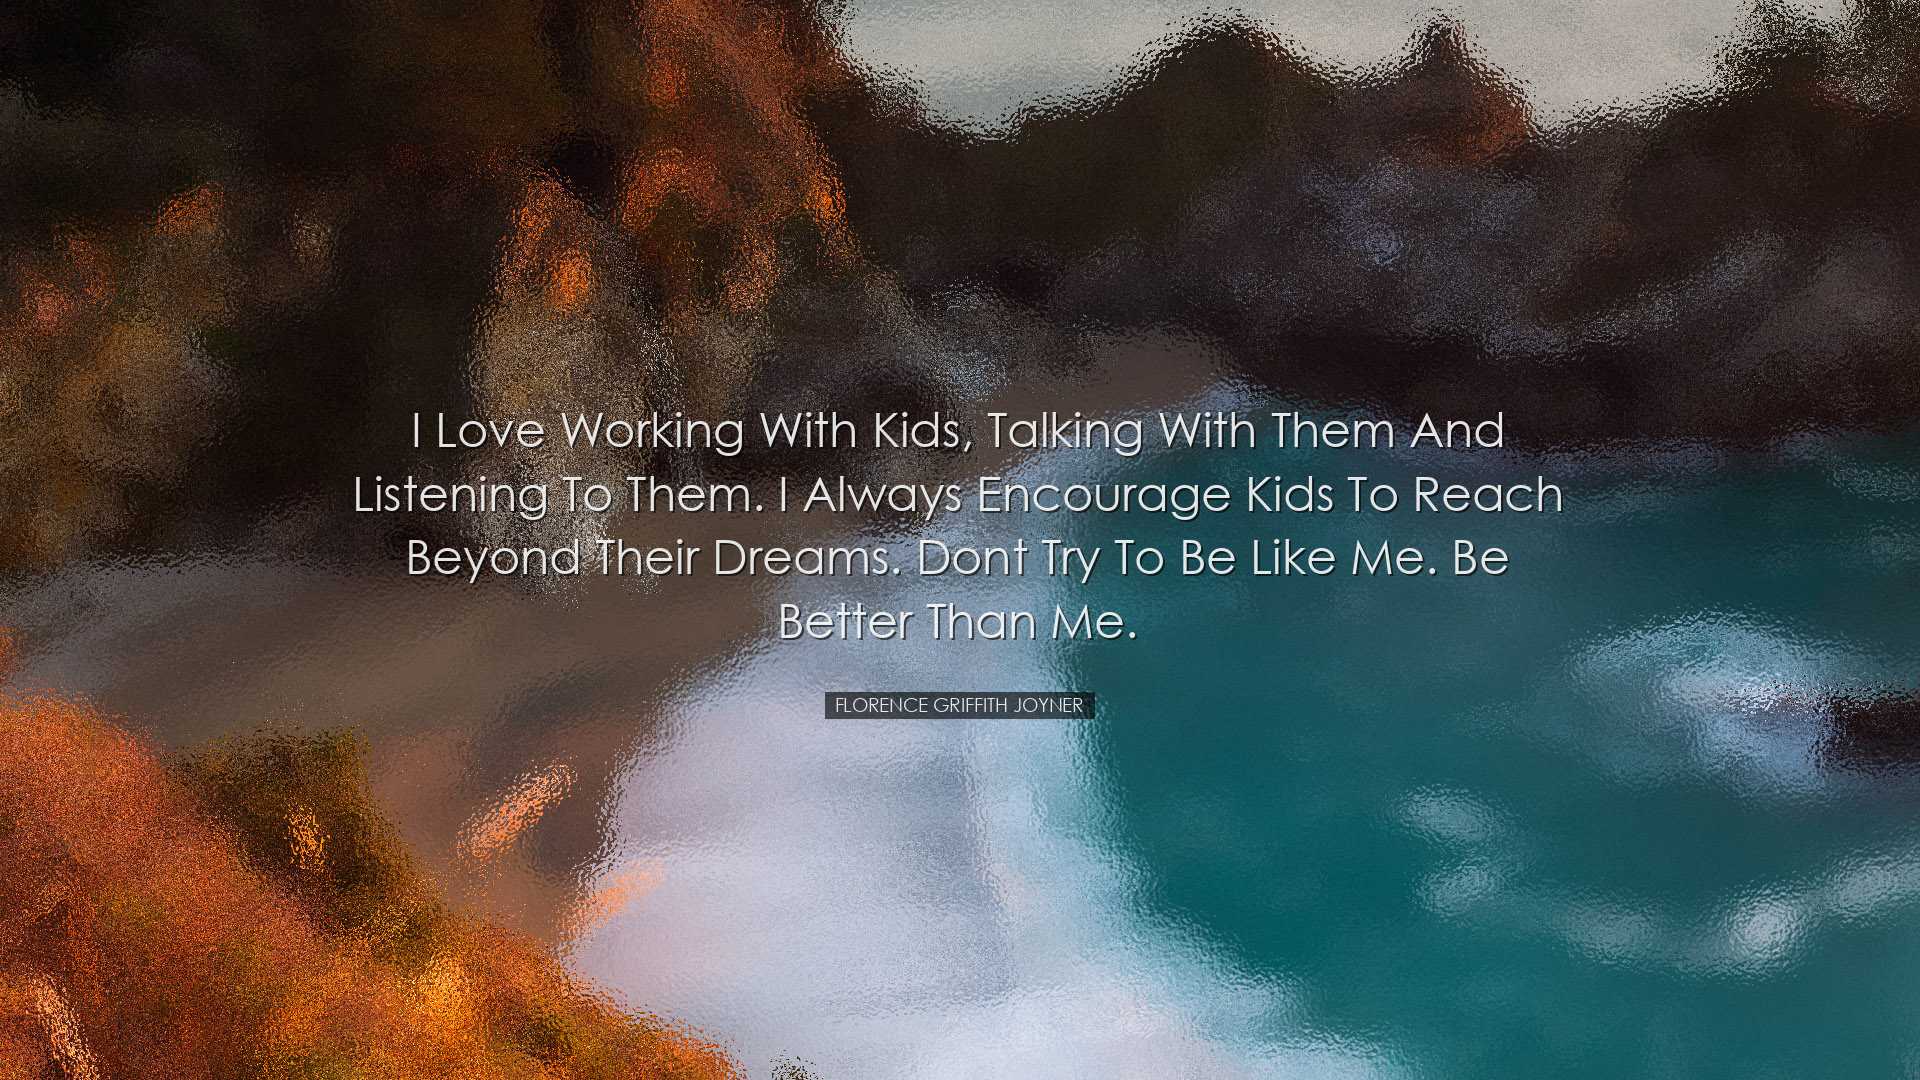 I love working with kids, talking with them and listening to them.